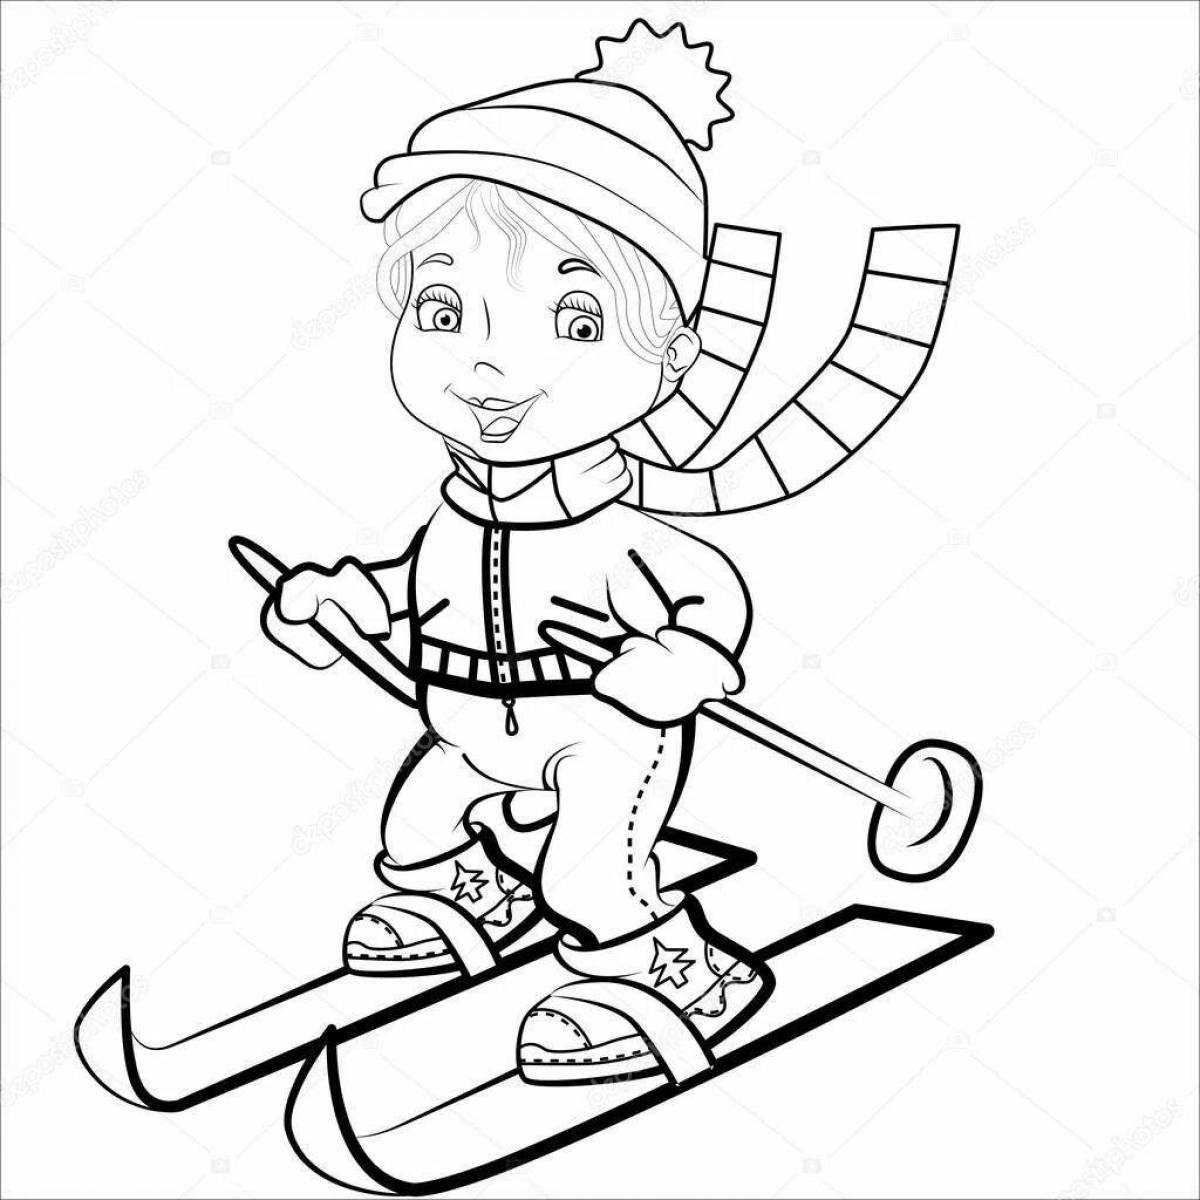 Dynamic skier coloring for kids